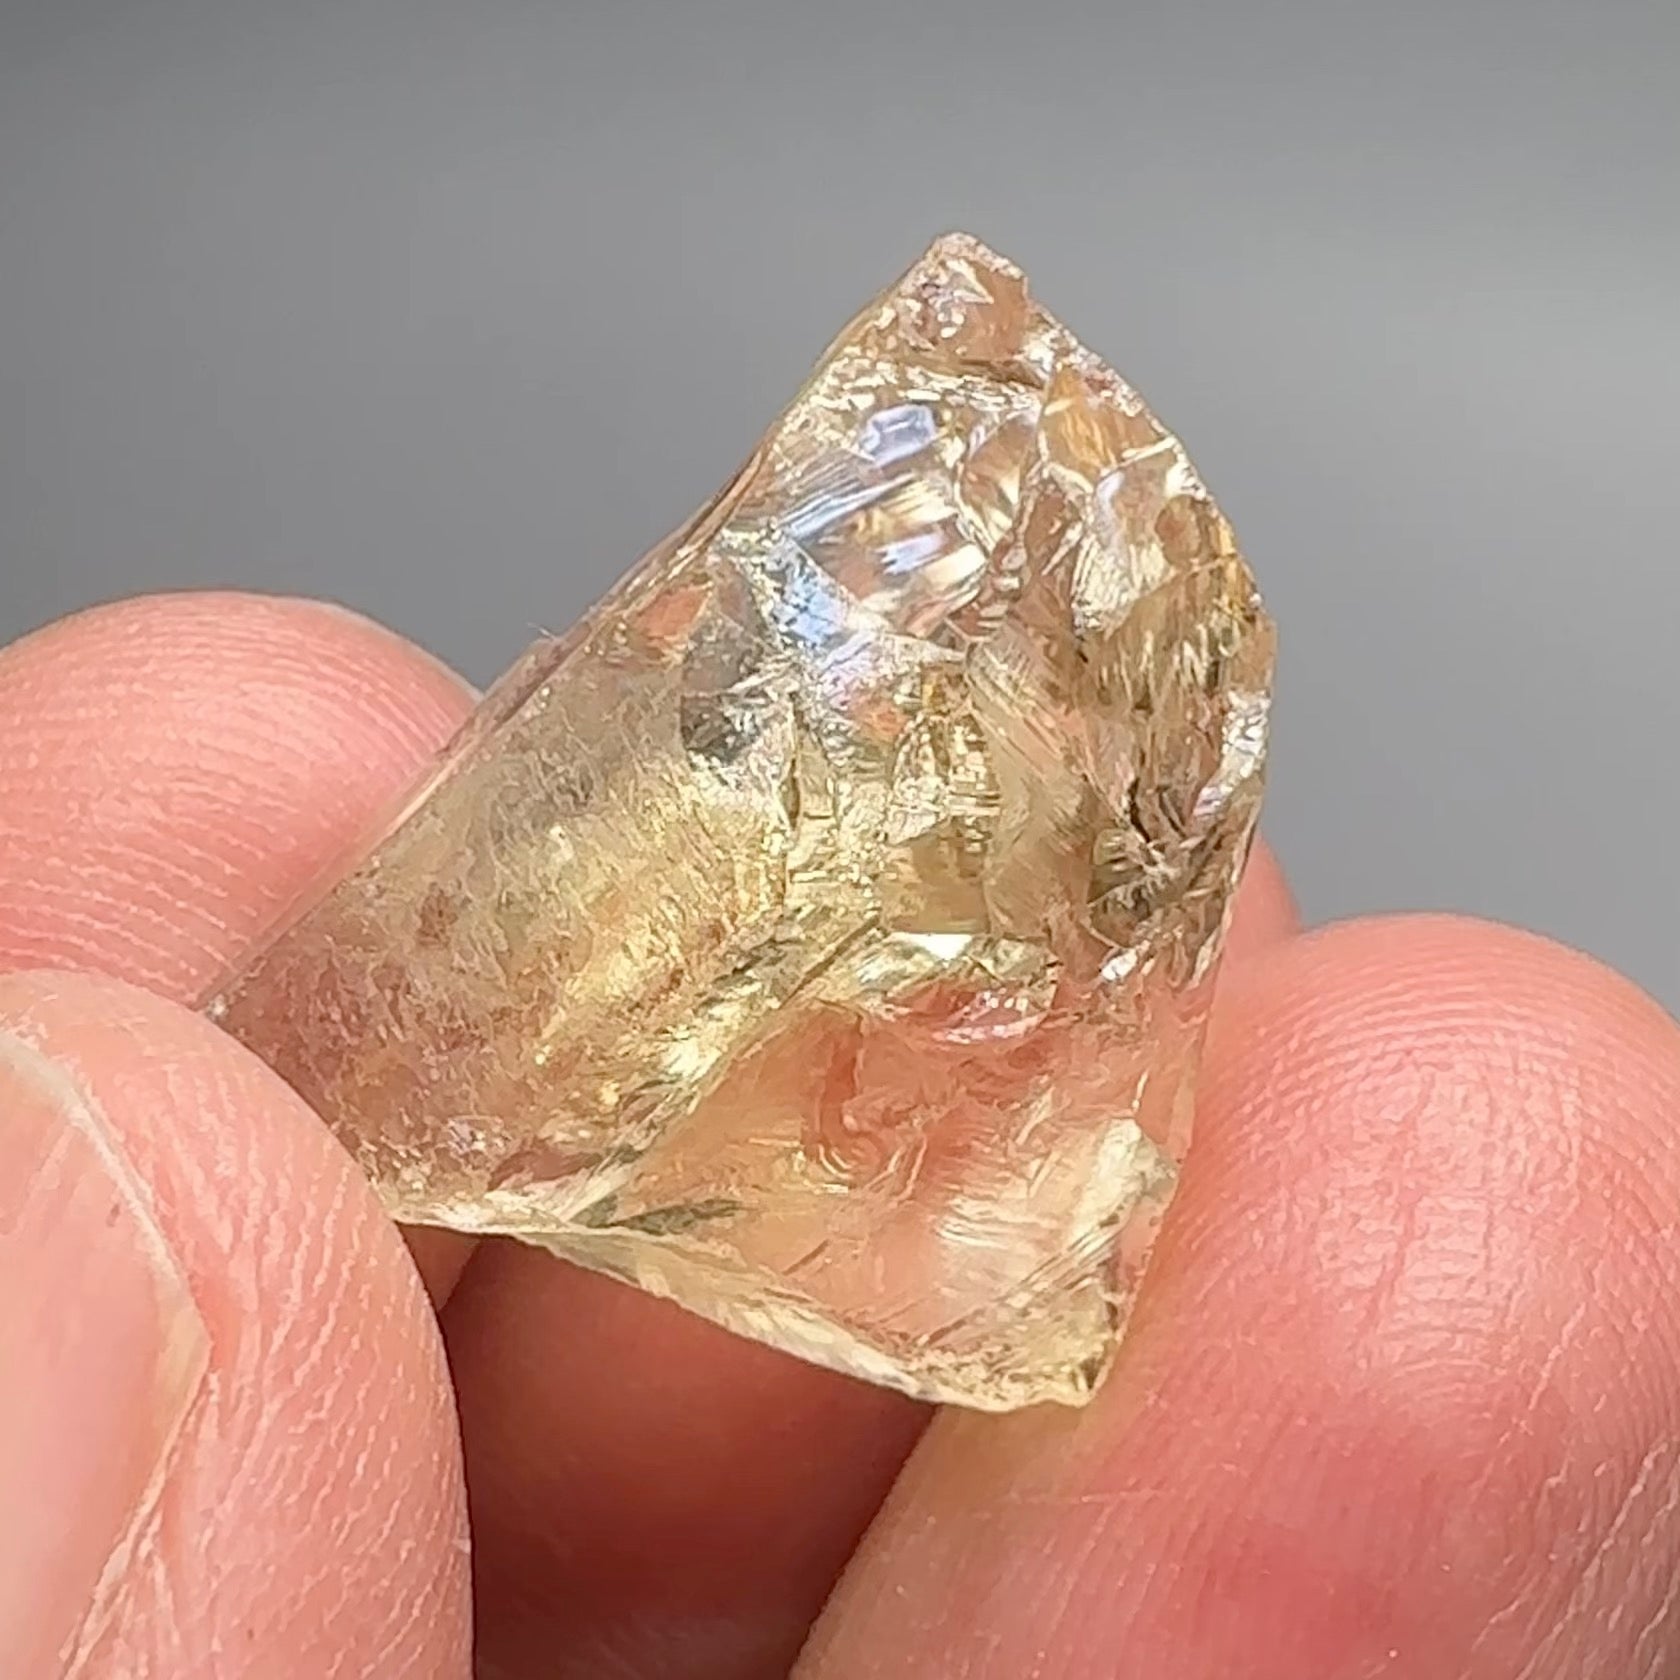 26.79ct Citrine, Zambia, Untreated Unheated, slight issues on outside, rest VVS-IF